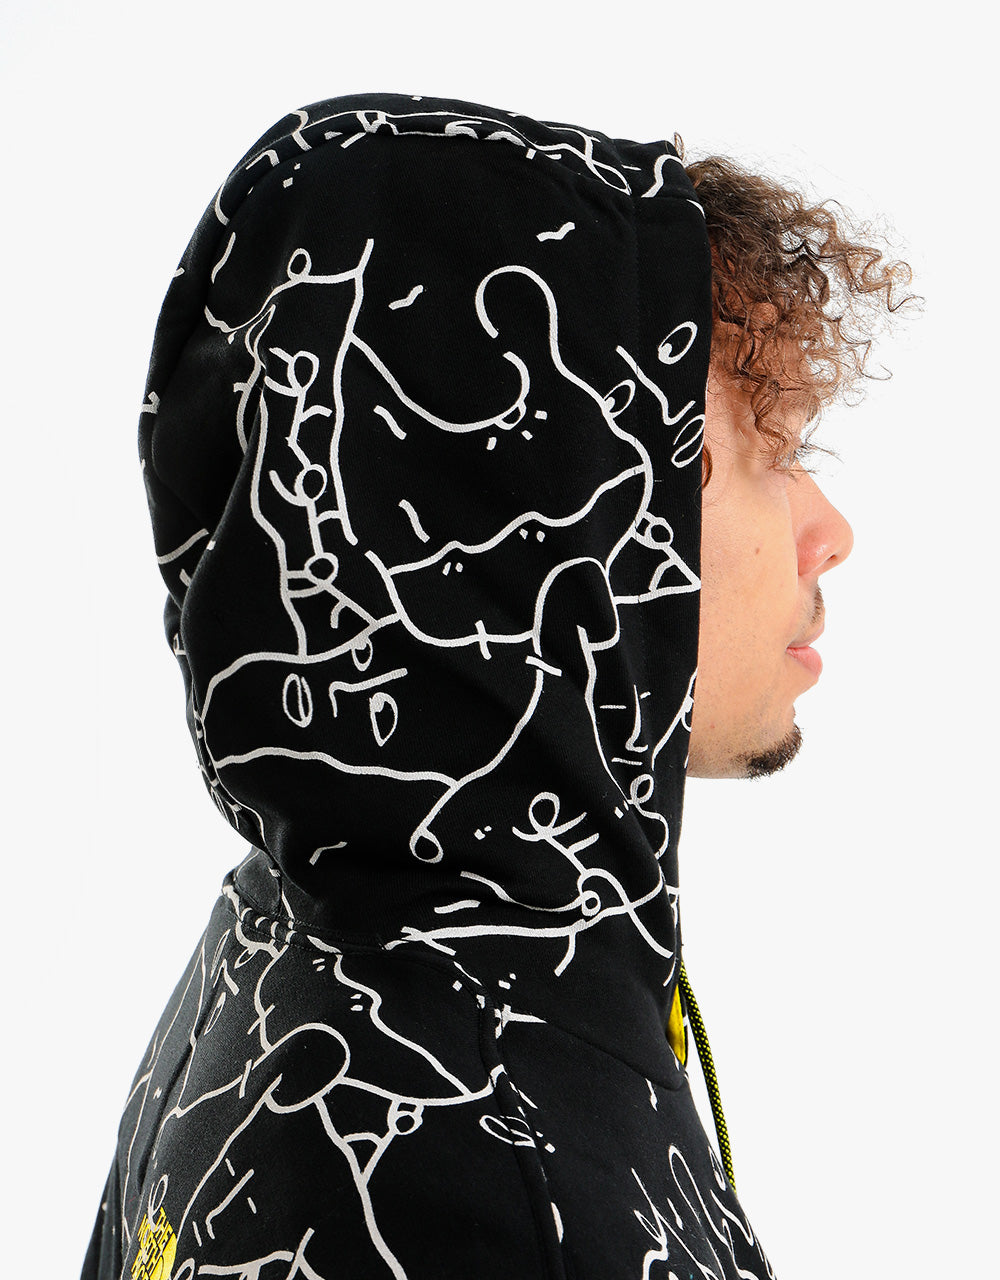 The North Face Black Box Search & Rescue Pullover Hoodie - TNF Black Shantell Martin